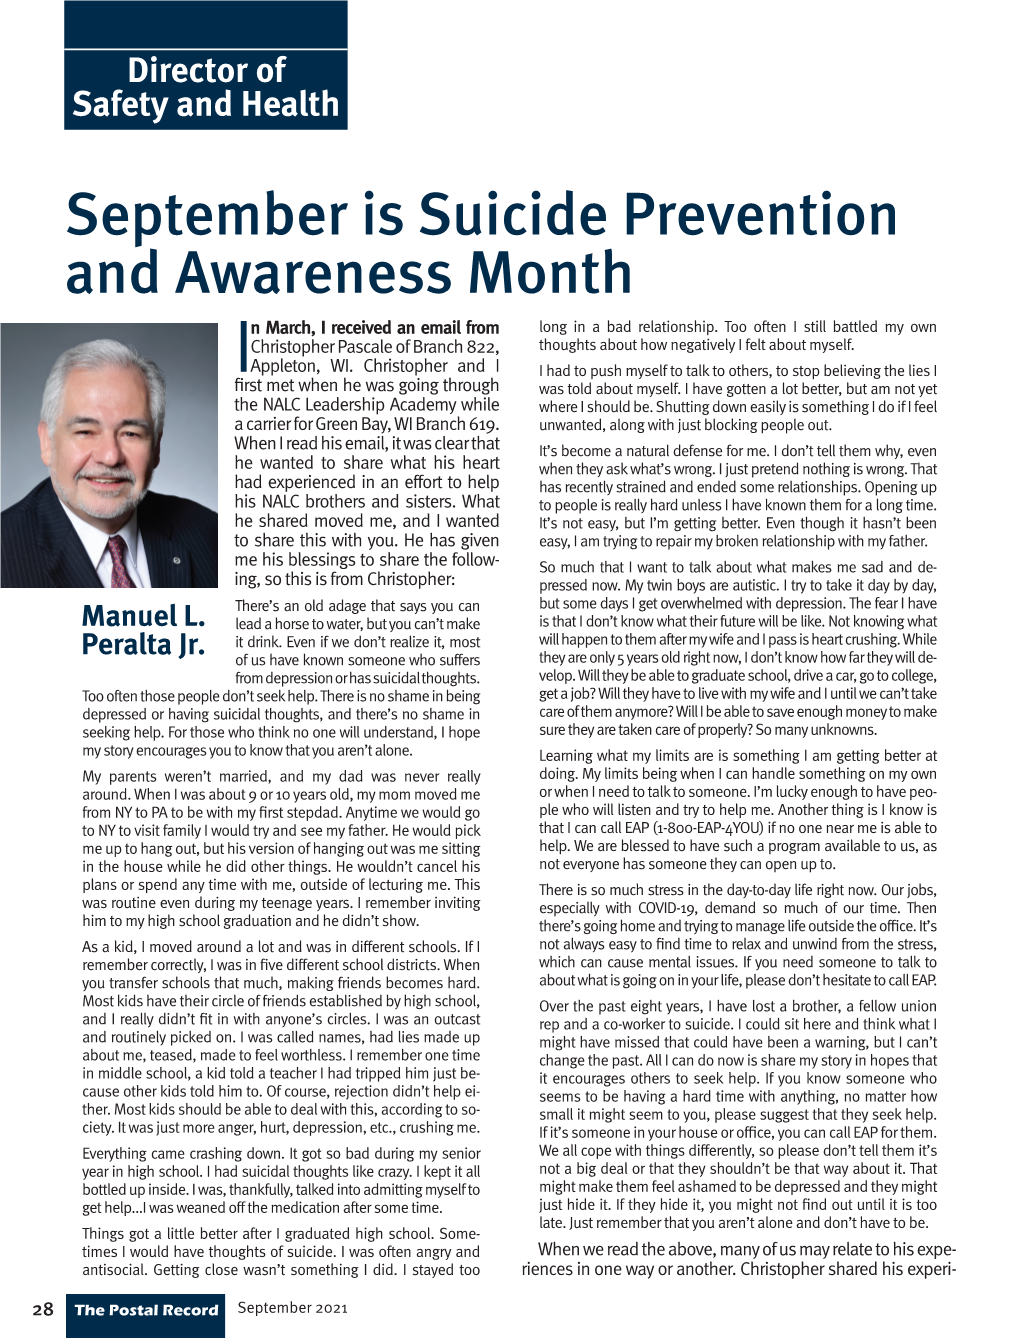 September Is Suicide Prevention and Awareness Month N March, I Received an Email from Long in a Bad Relationship